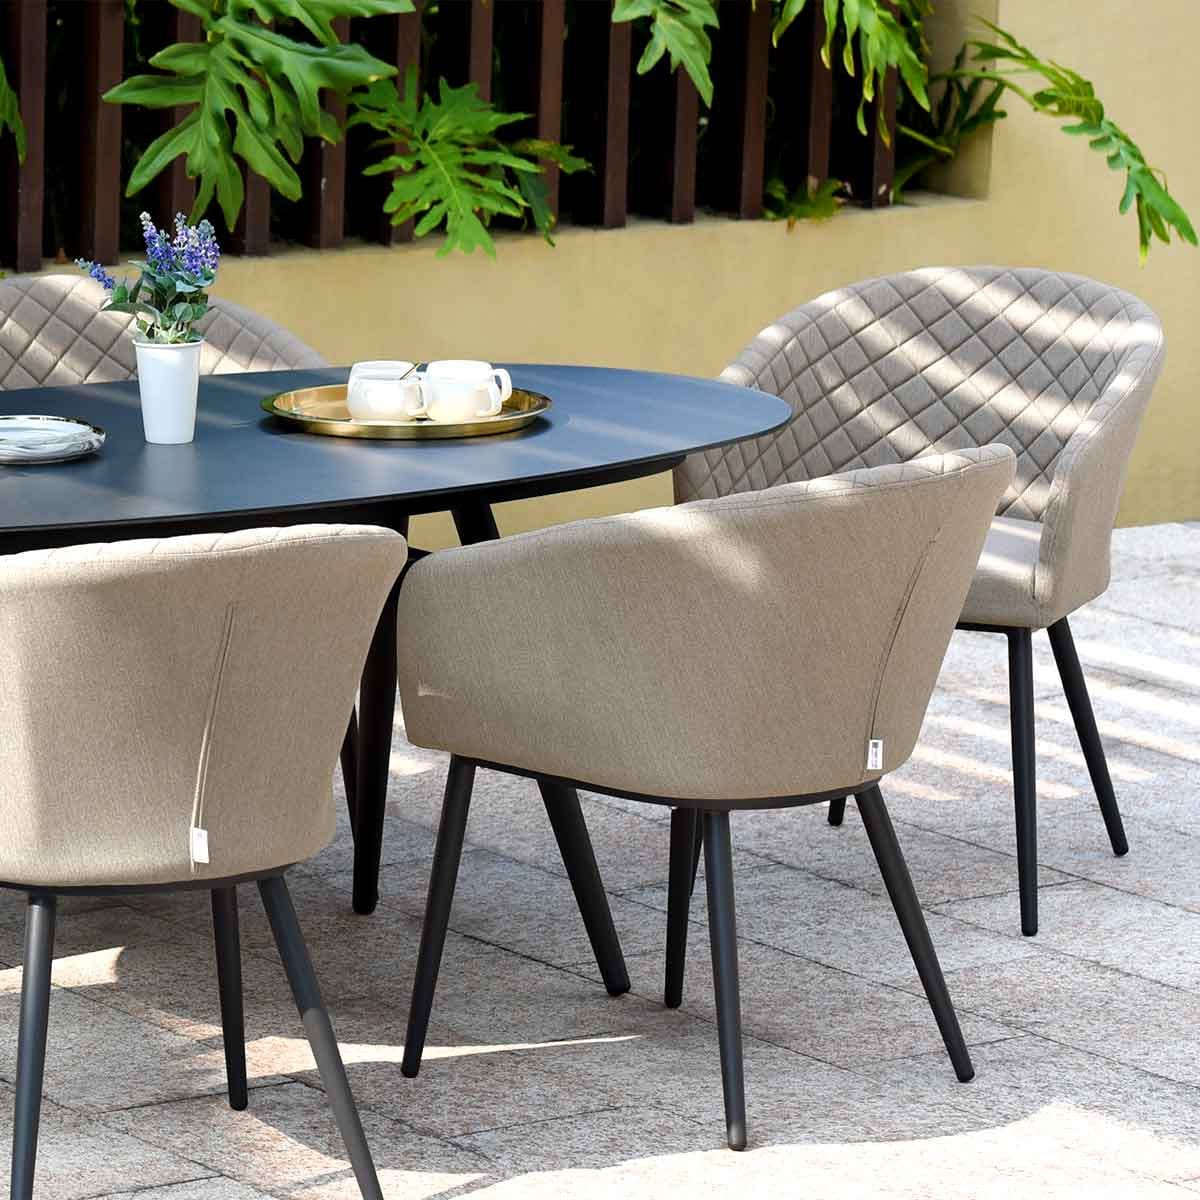 Maze Outdoors Ambition 8 Seat Oval Dining Set / Taupe House of Isabella UK